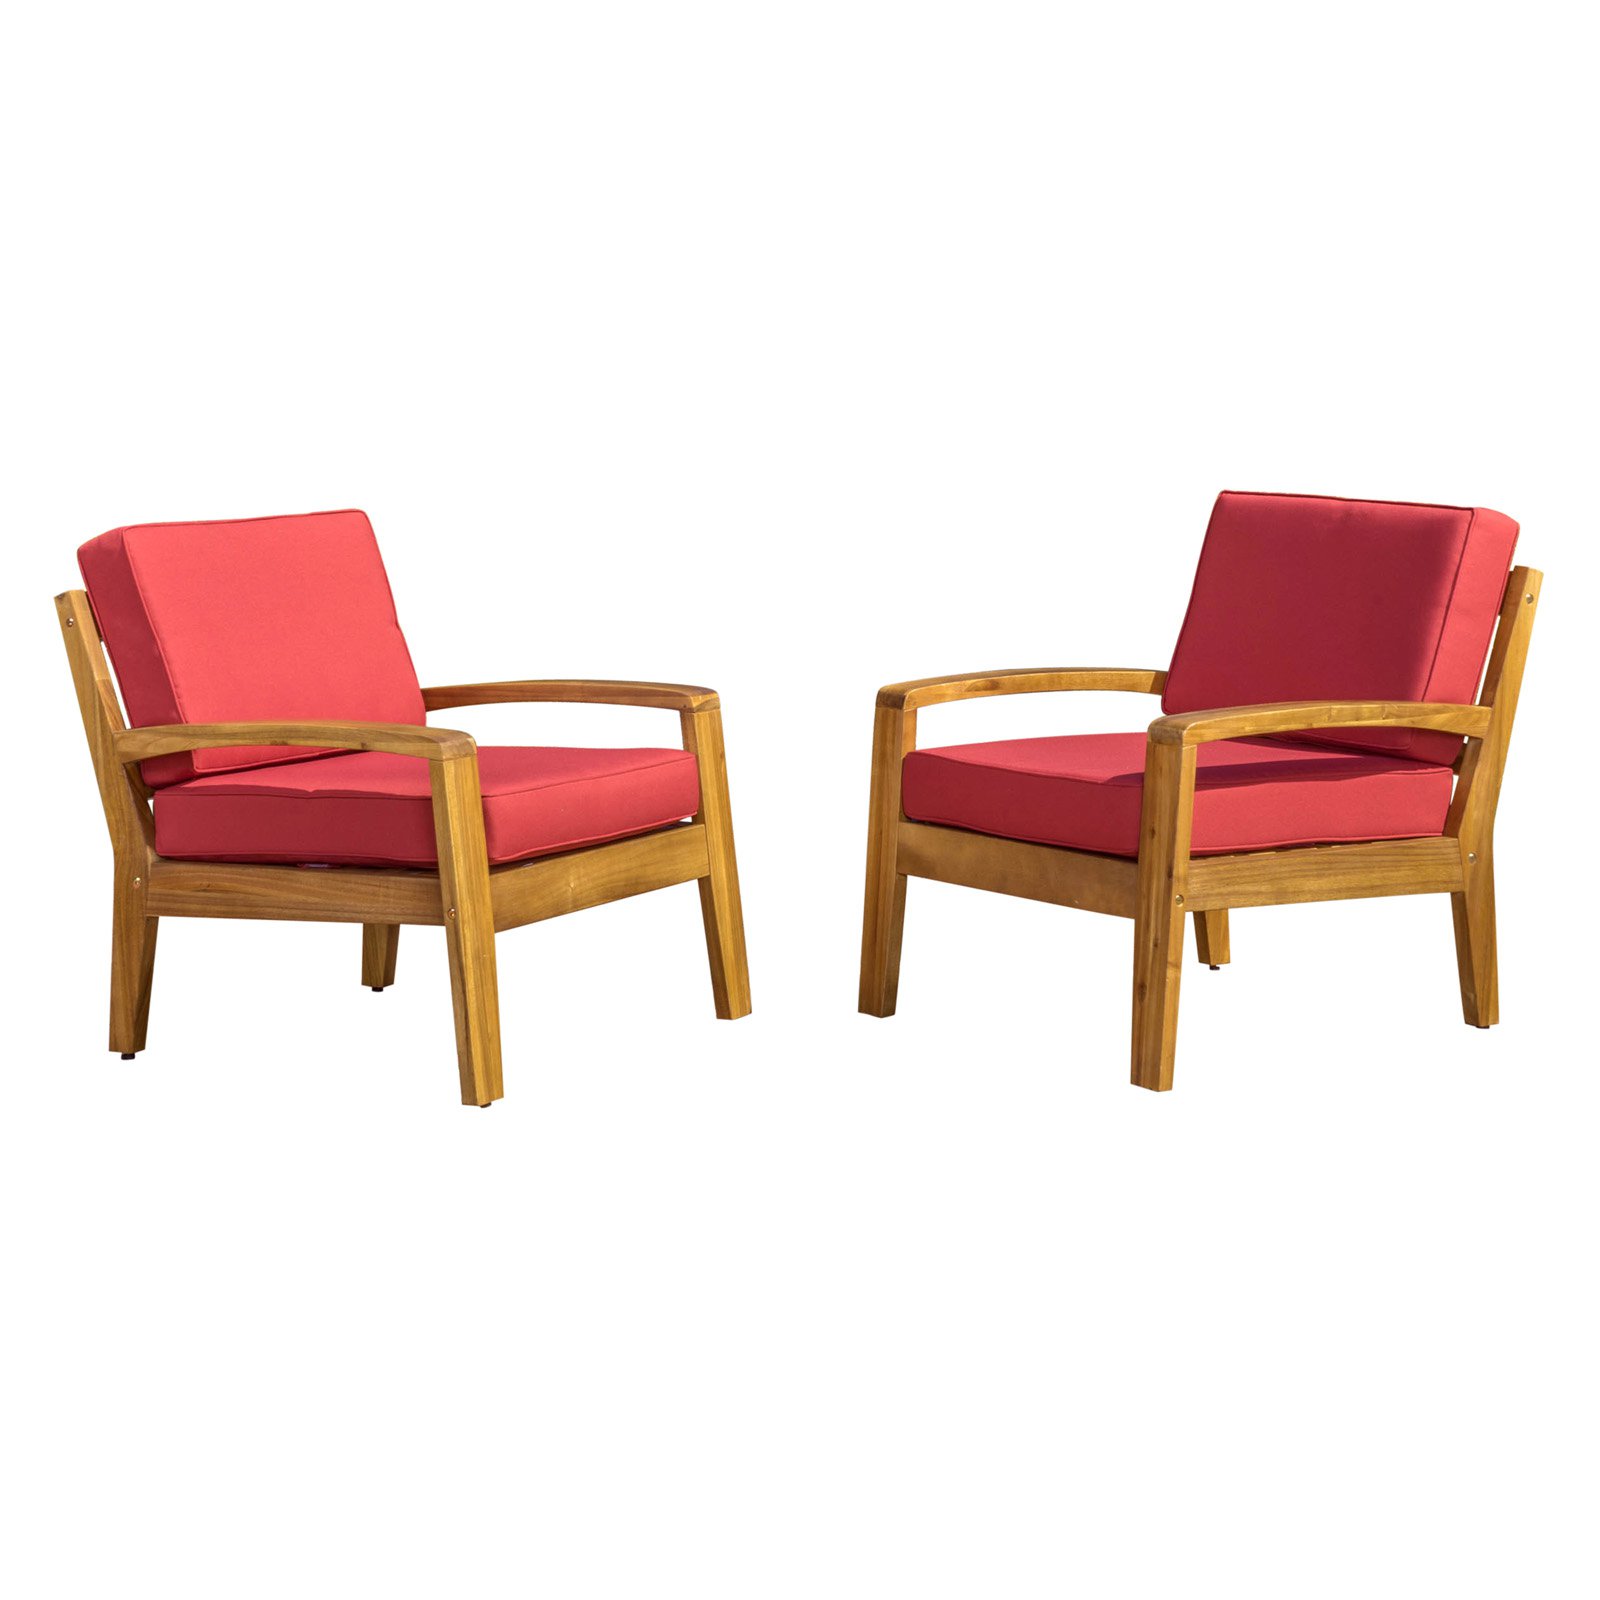 Gorlomi Wooden Patio Club Chairs with Cushions - image 1 of 6